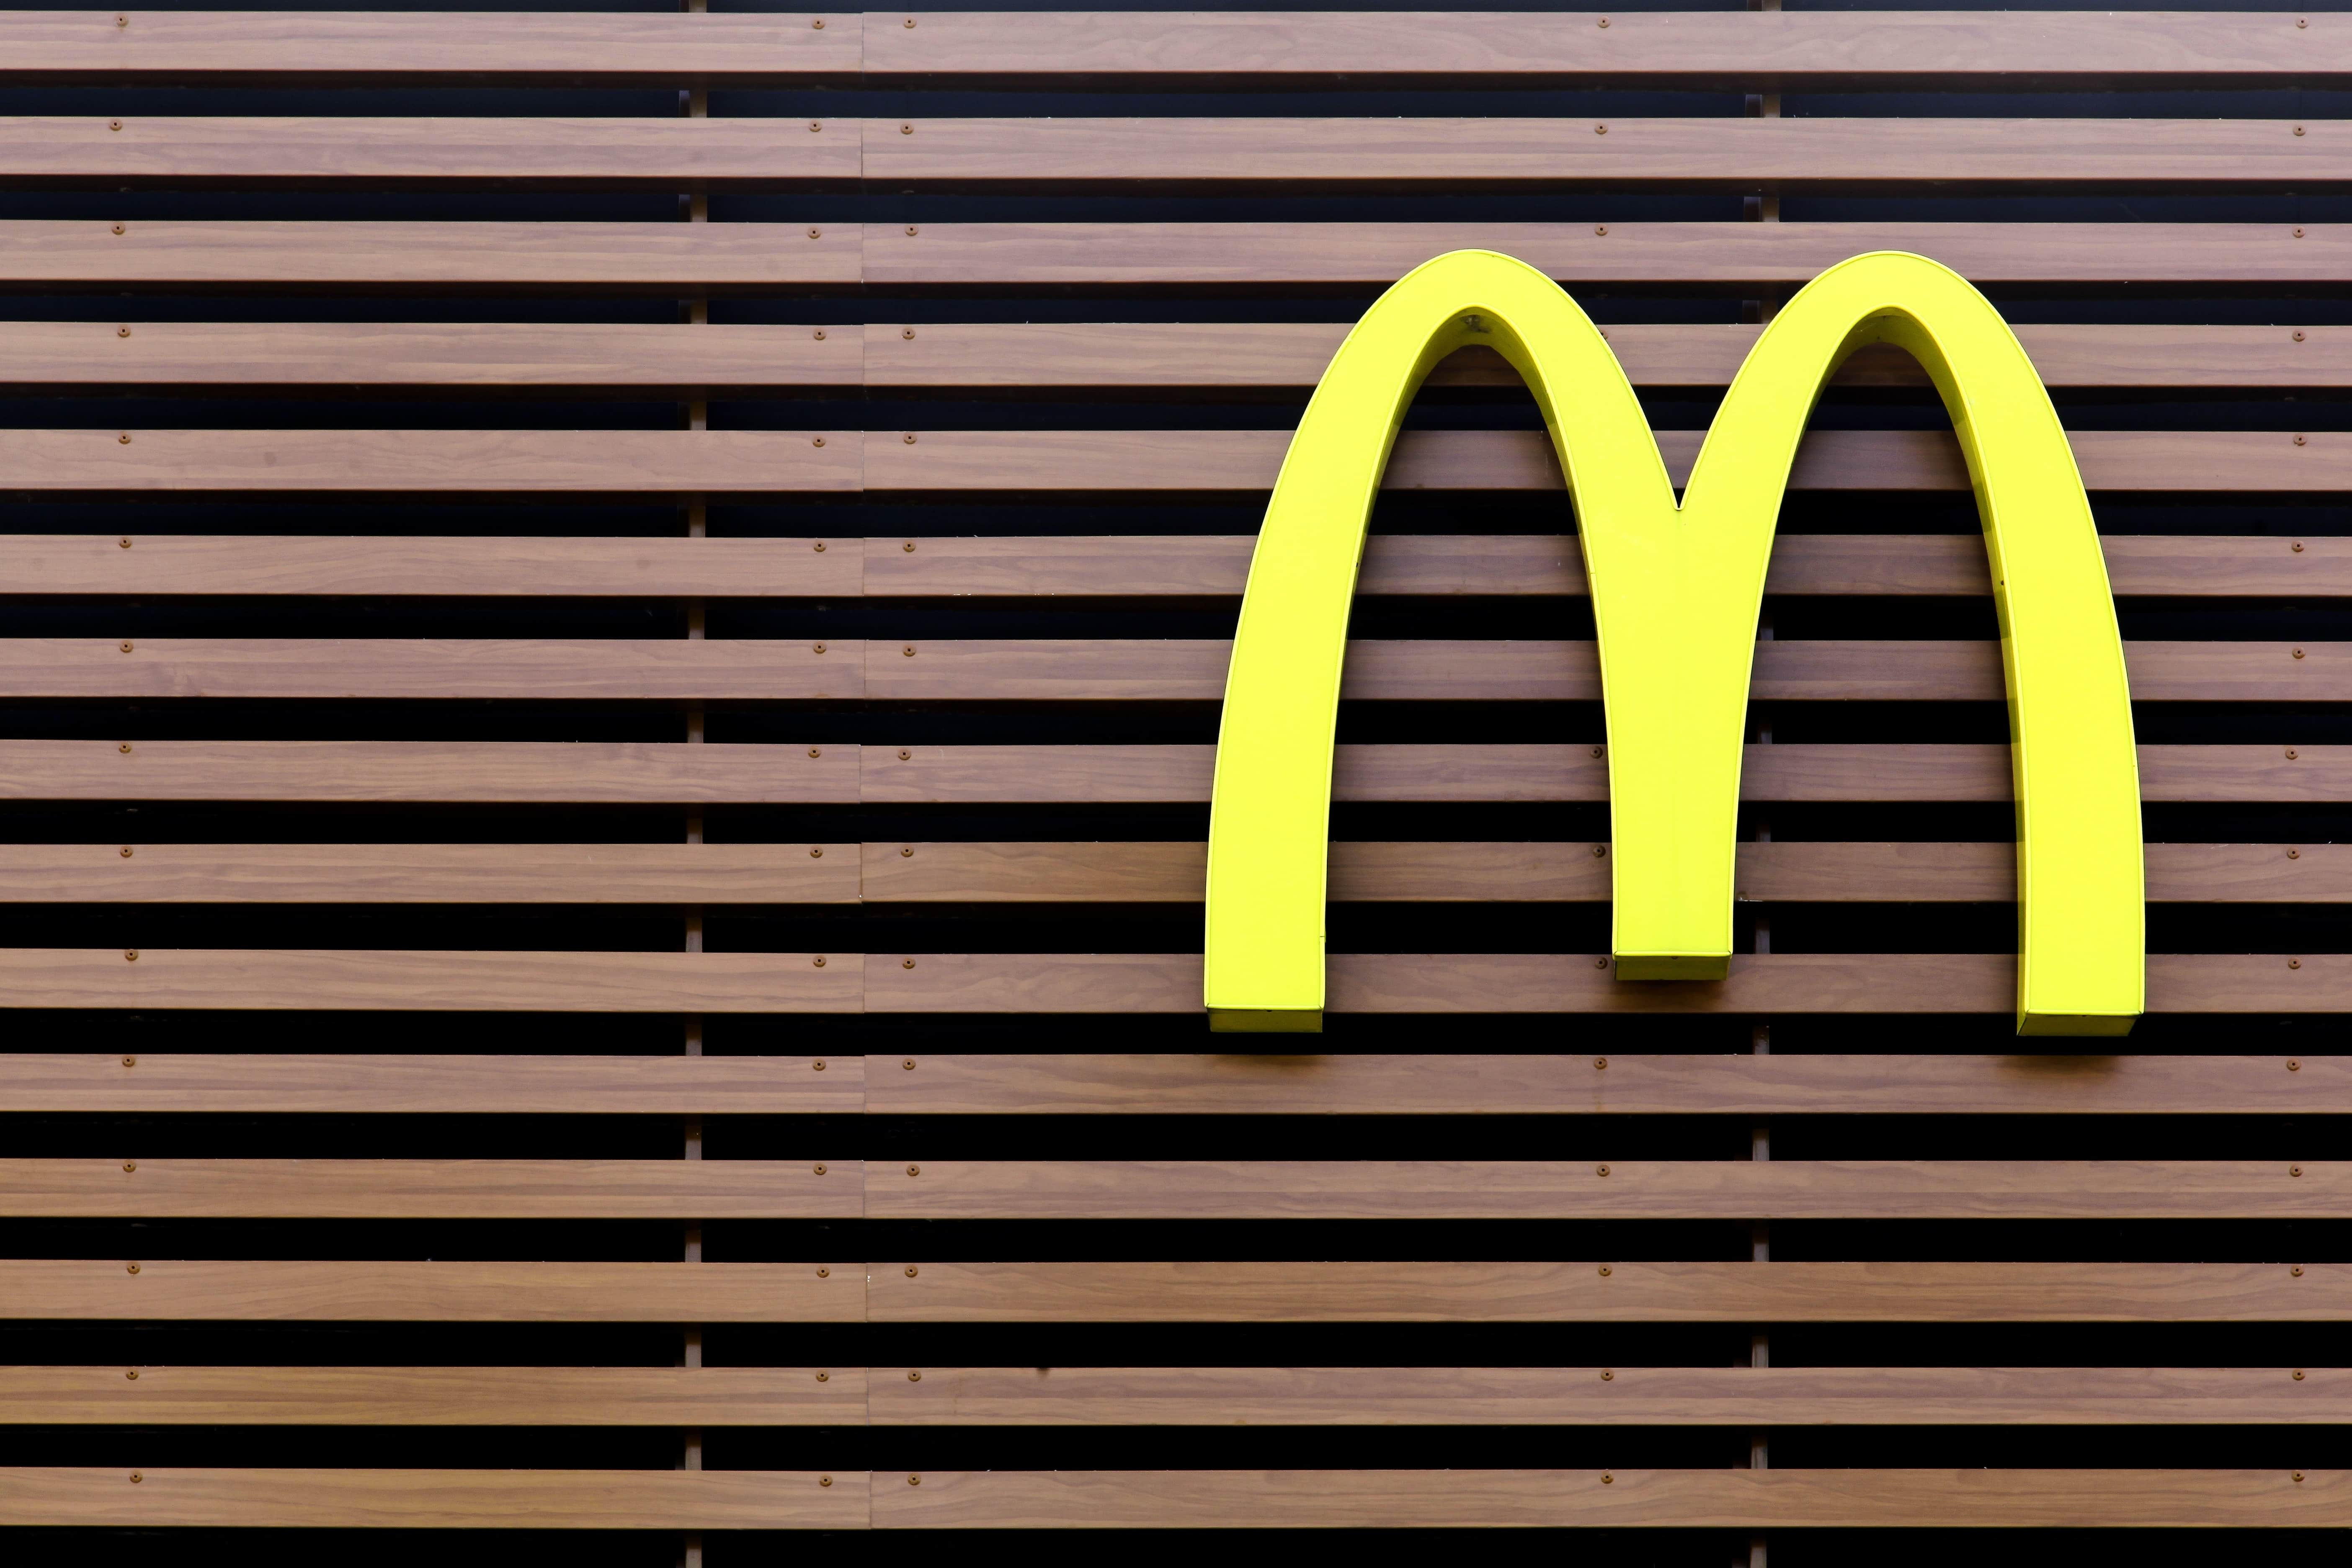 behind-the-success-of-mcdonalds-2018-fifa-world-cup-campaign